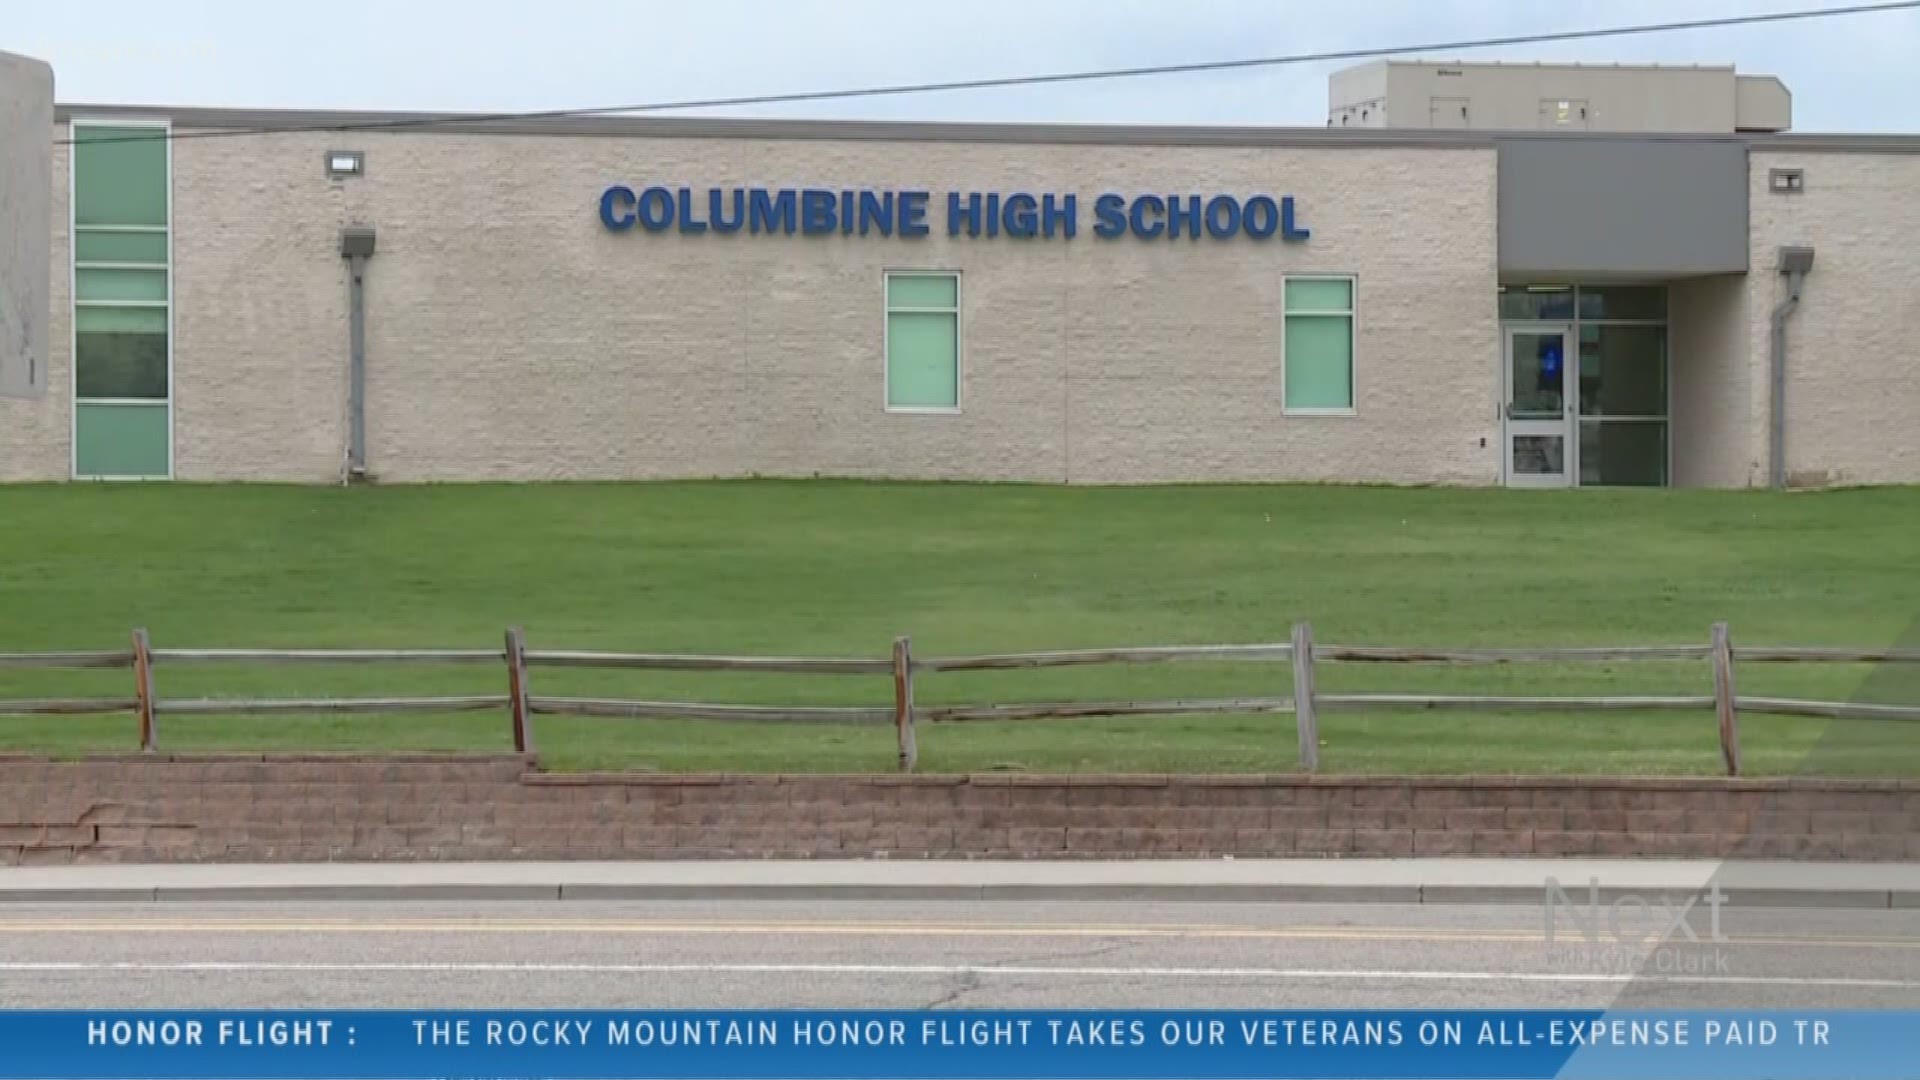 In a message from the JeffCo Superintendent, Dr. Jason Glass says it may be time for the community to consider tearing down Columbine High School to rebuild because of "morbid" fascination with the school since the shooting.